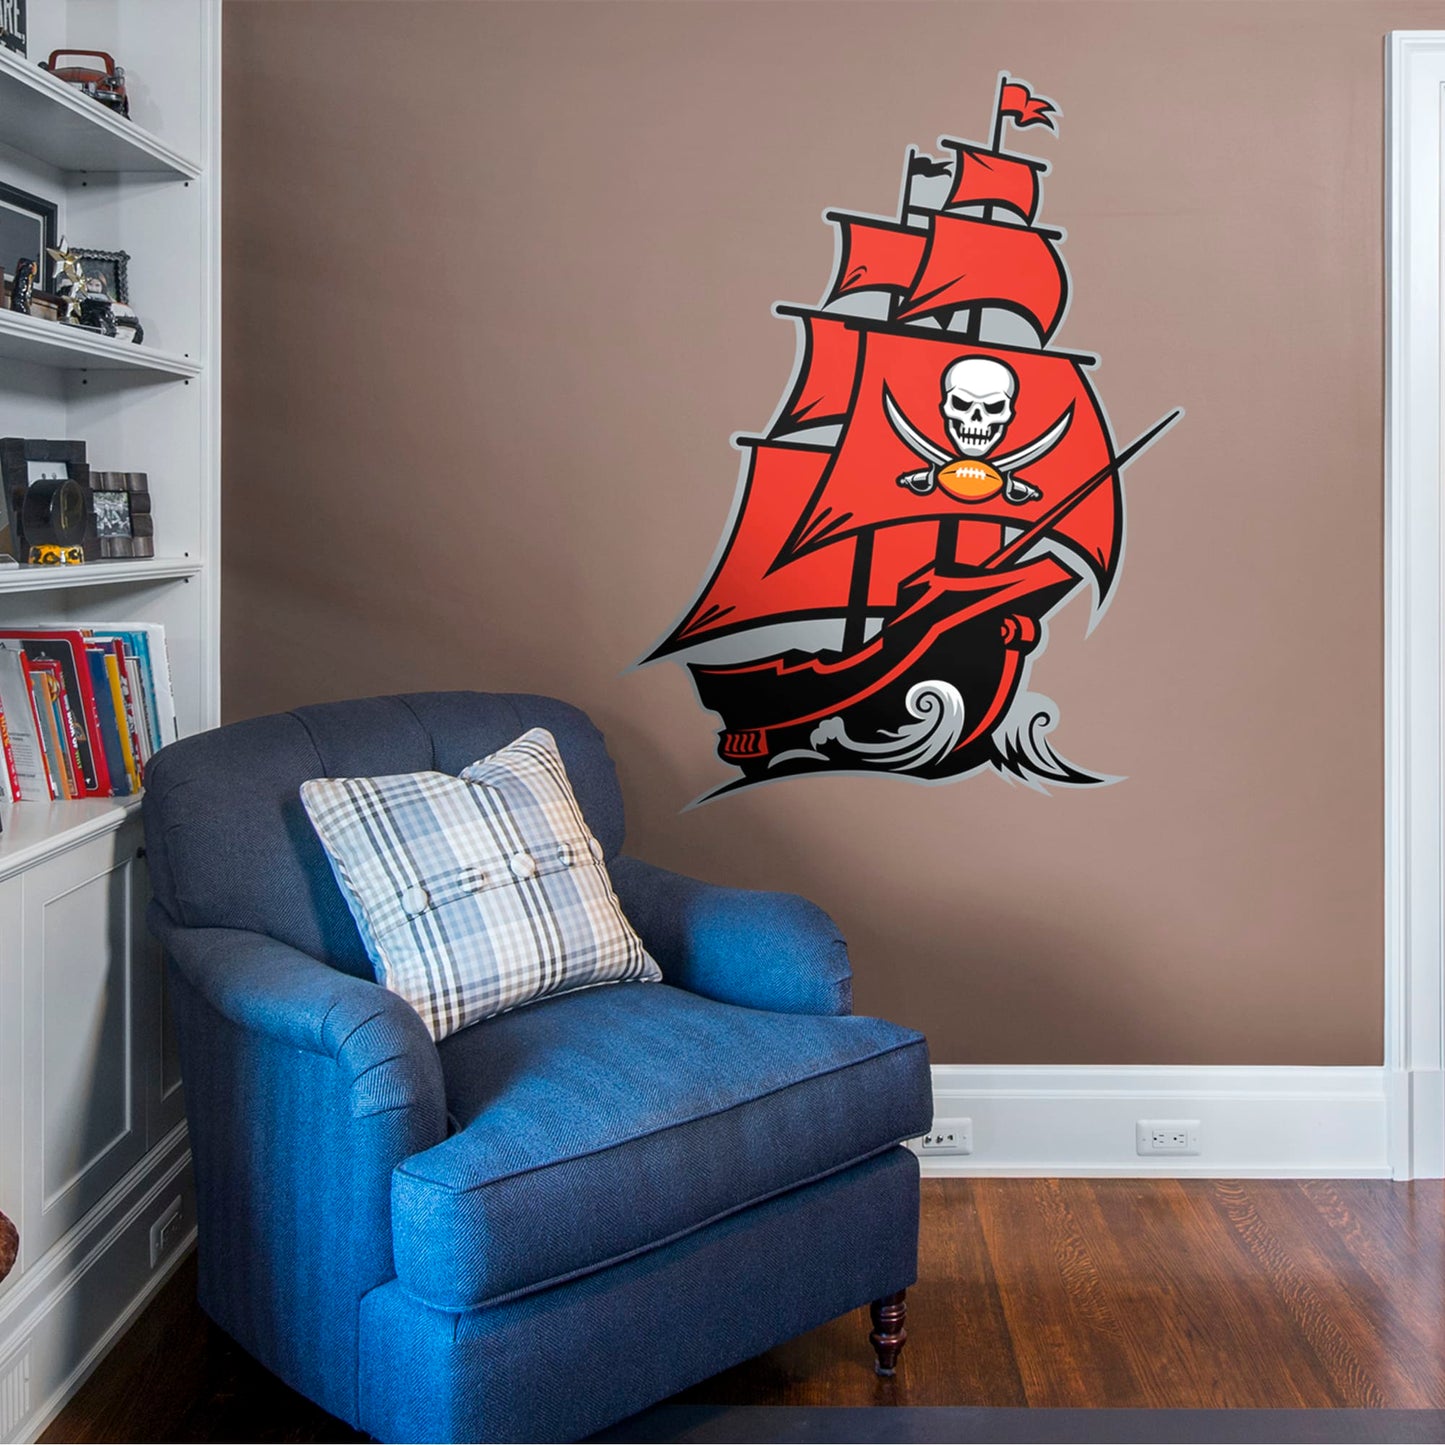 Tampa Bay Buccaneers: Pirate Ship Logo - Officially Licensed NFL Removable Wall Decal